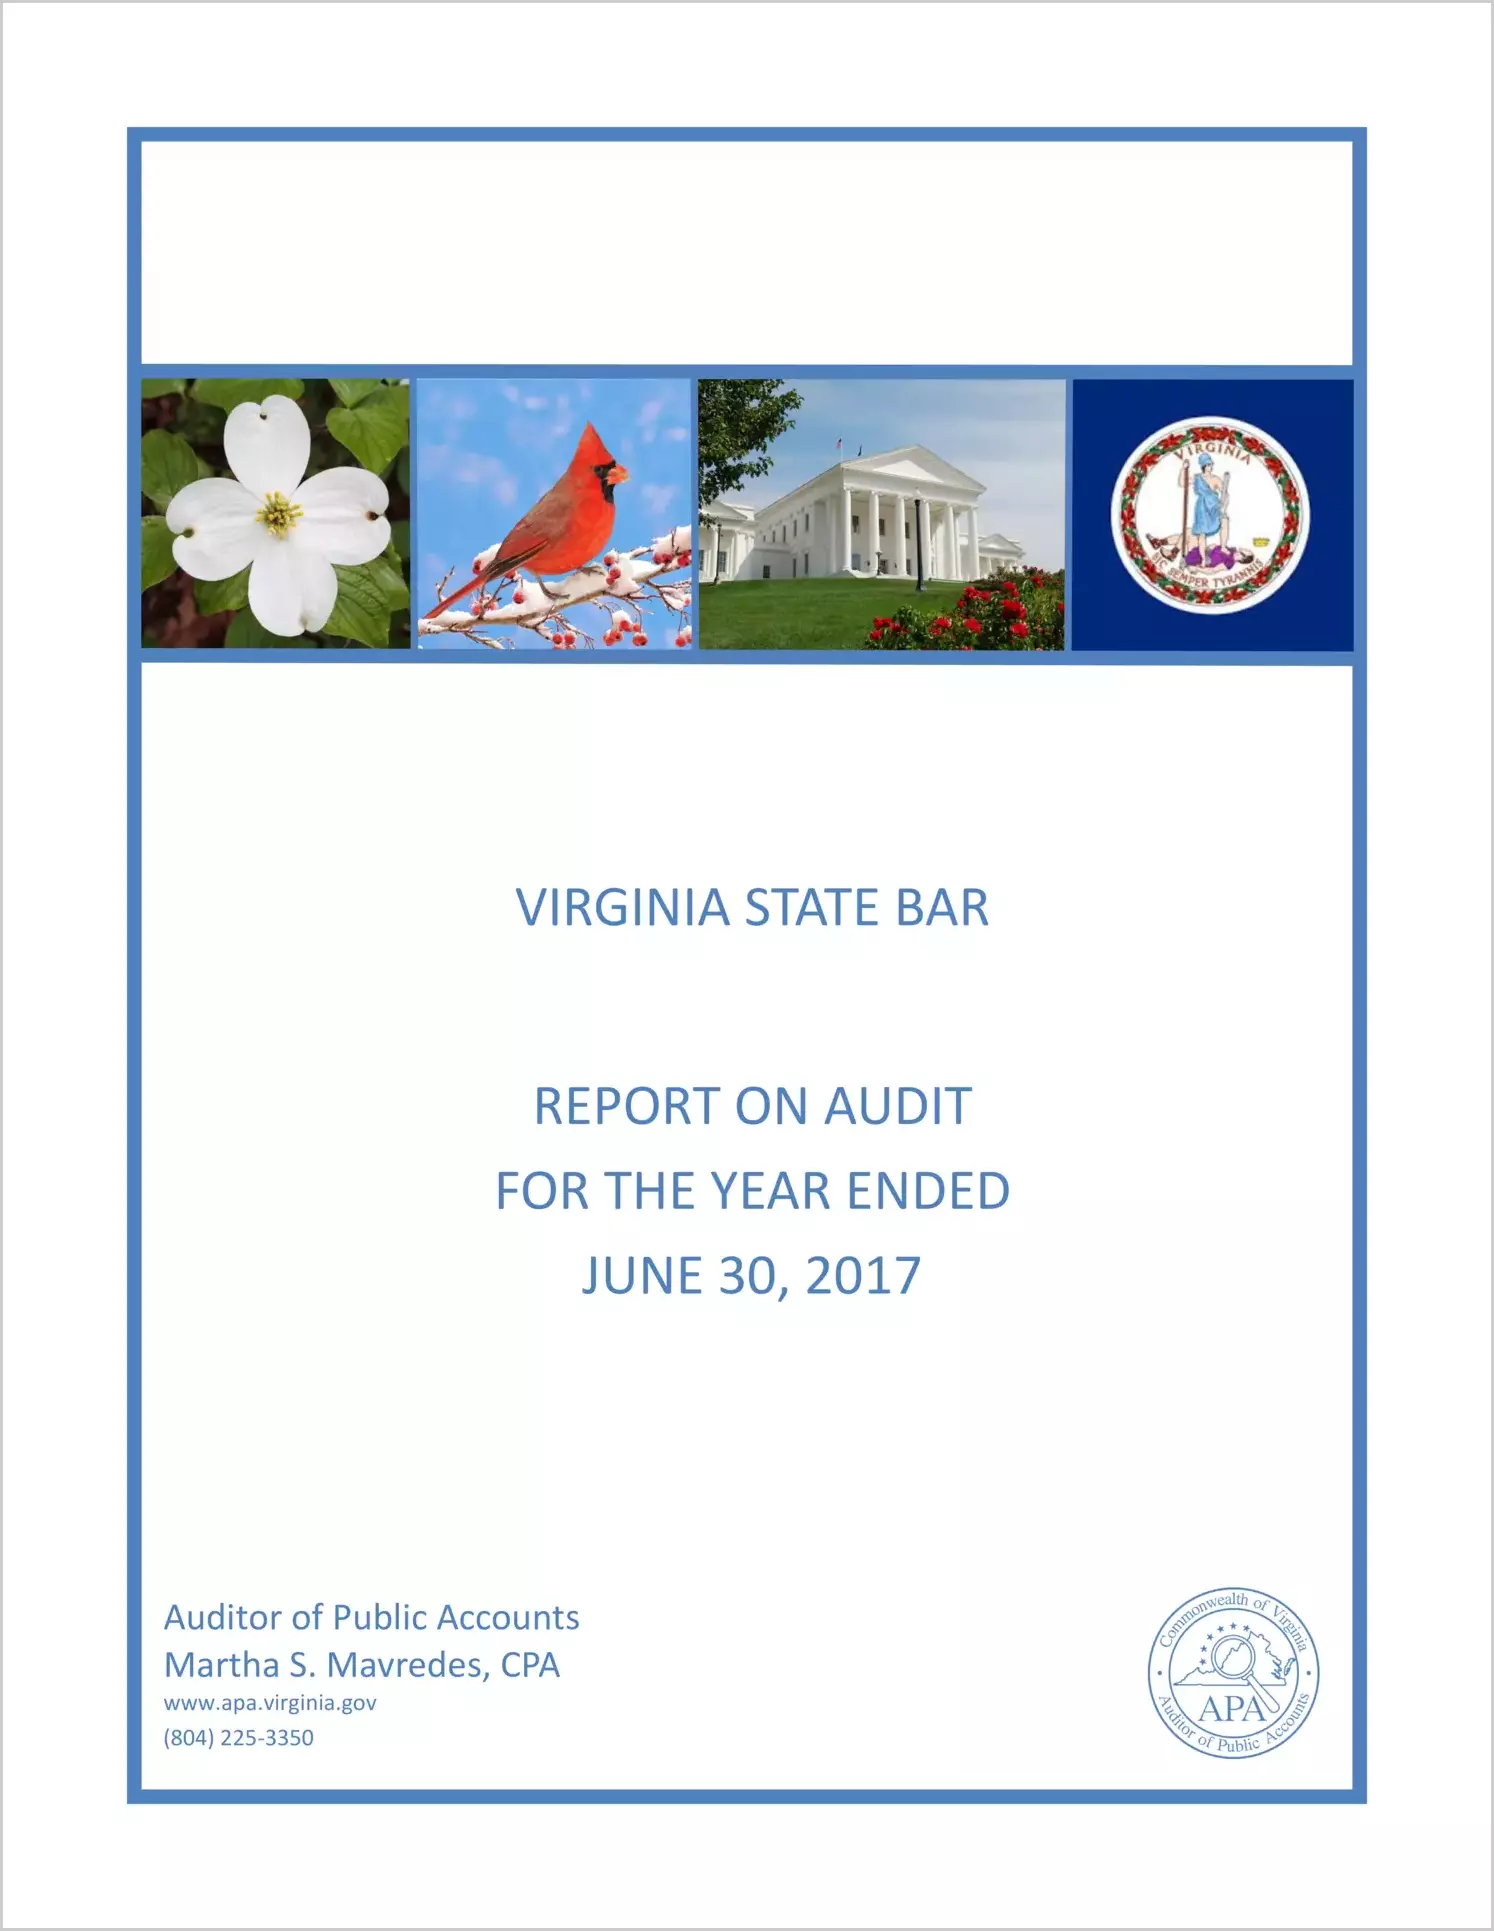 Virginia State Bar for the year ended June 30, 2017